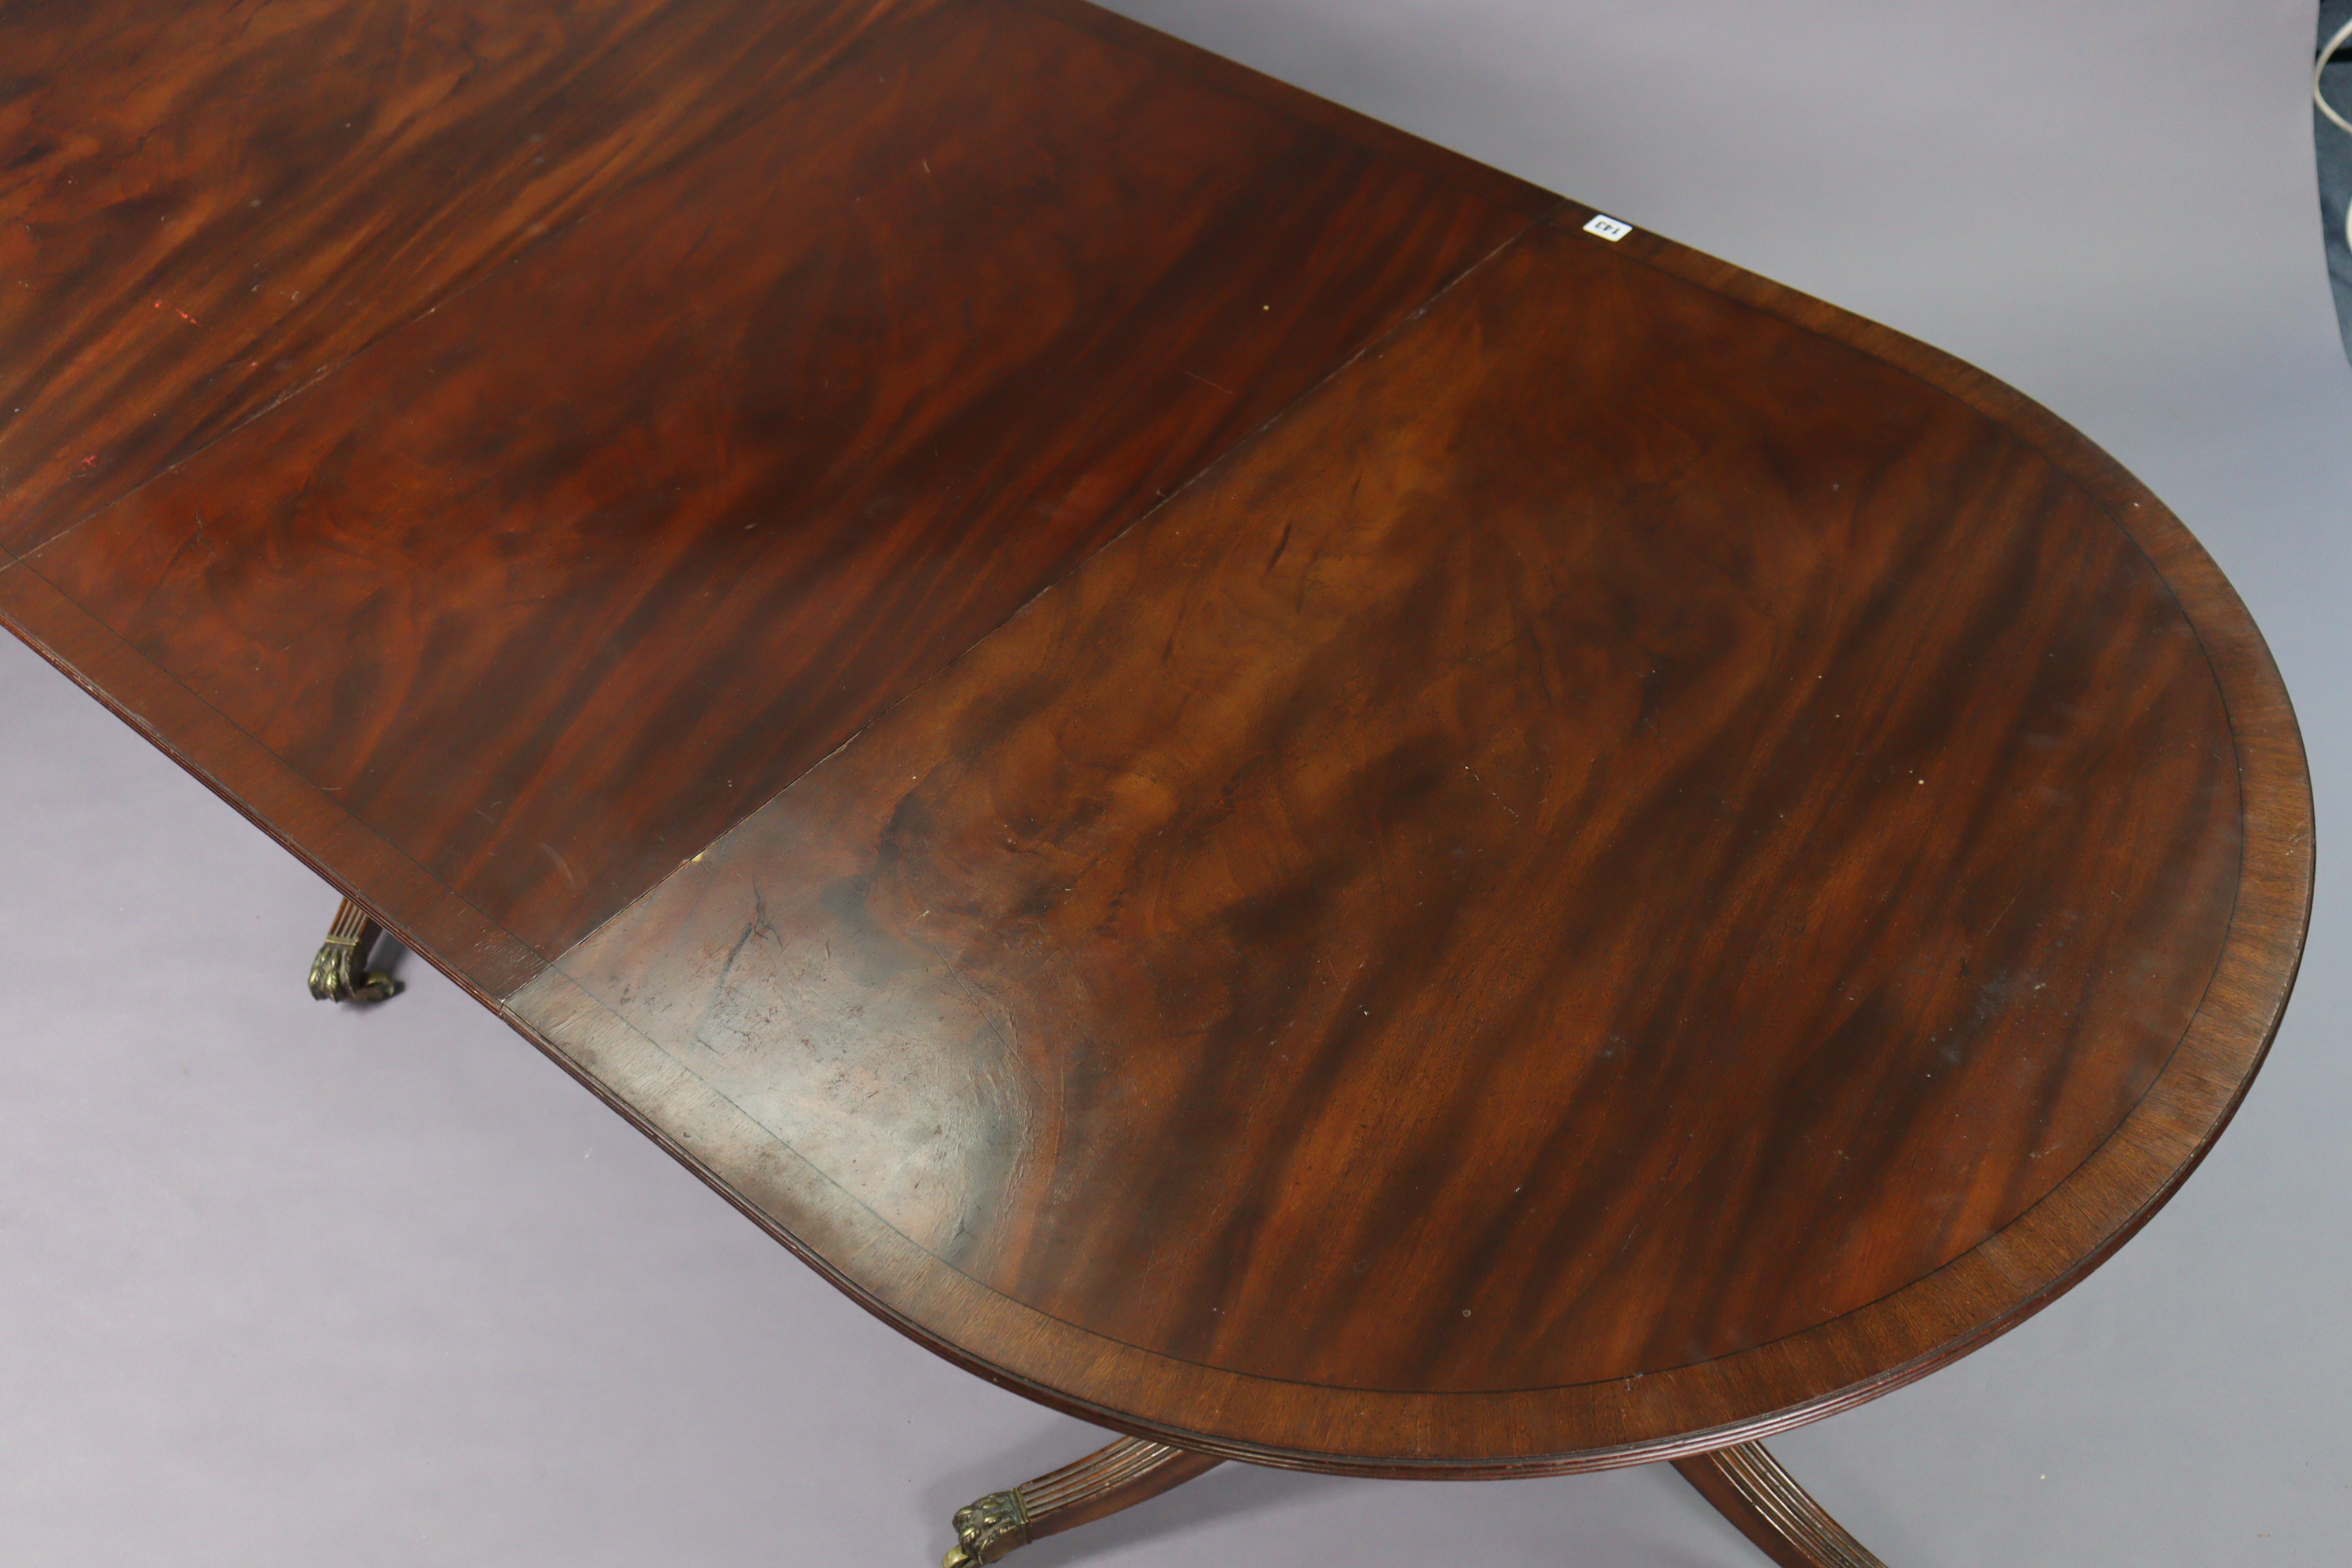 A regency-style inlaid-mahogany twin-pedestal tilt top extending dining table with d-shaped ends, - Image 4 of 9